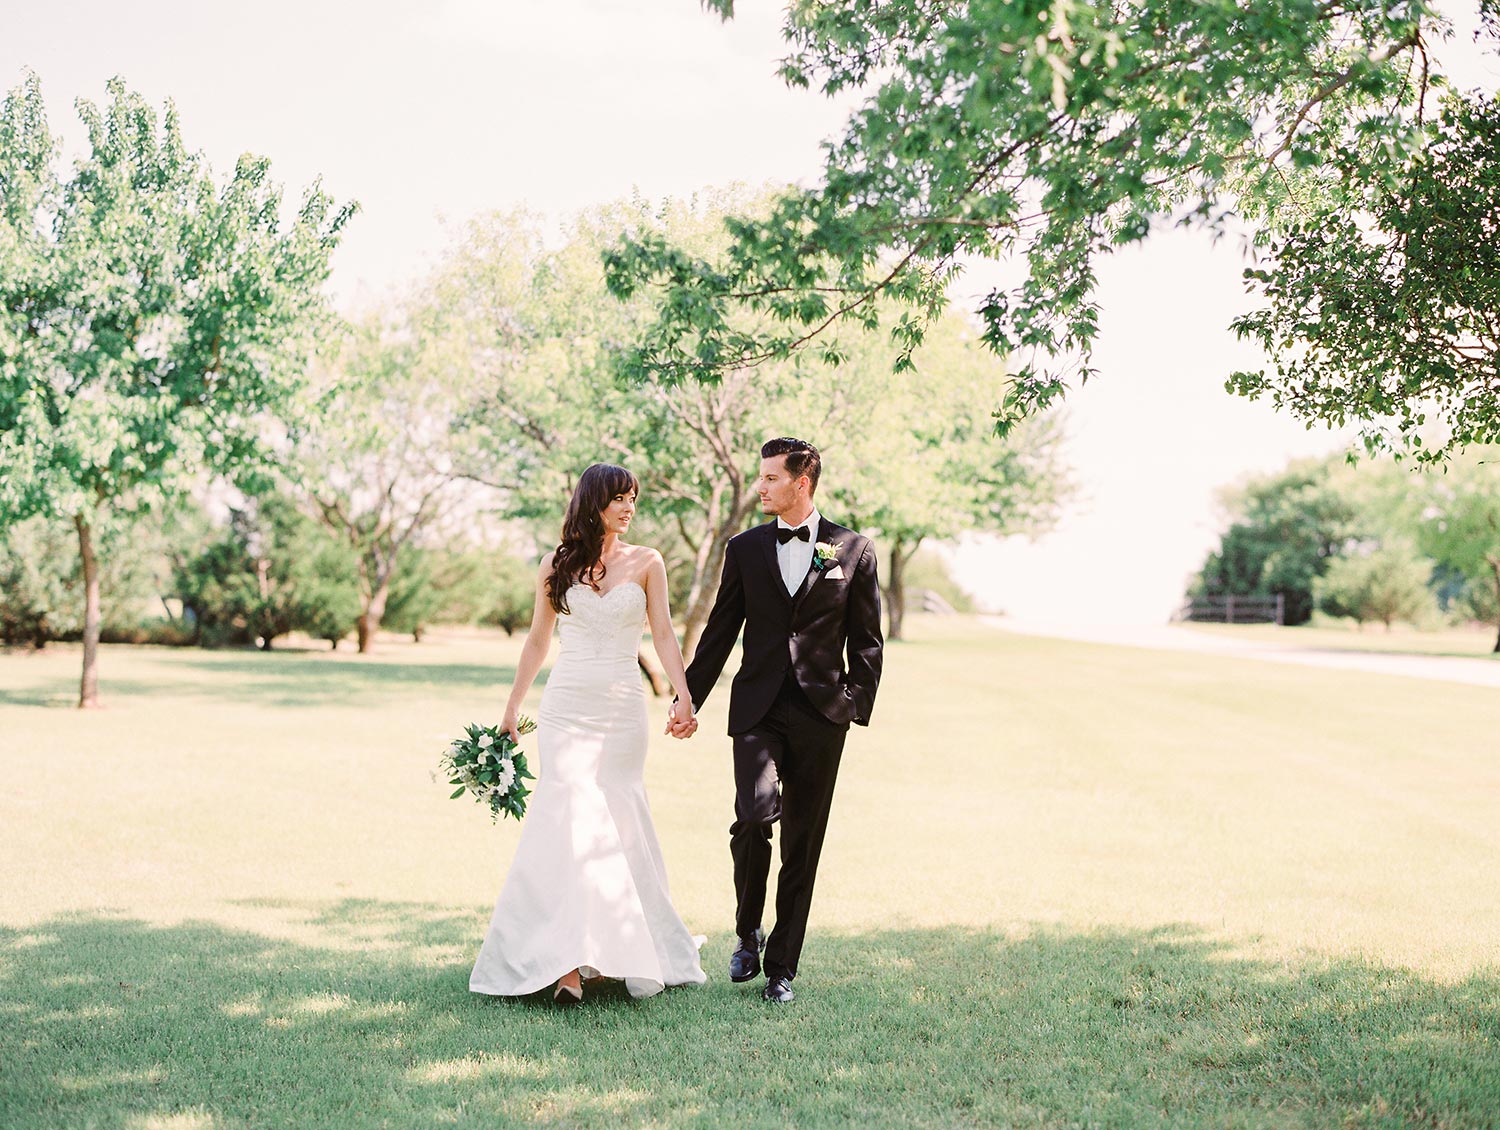 Bridea and groom walking outside and big open field in classic wedding attire at Miletone in Denton